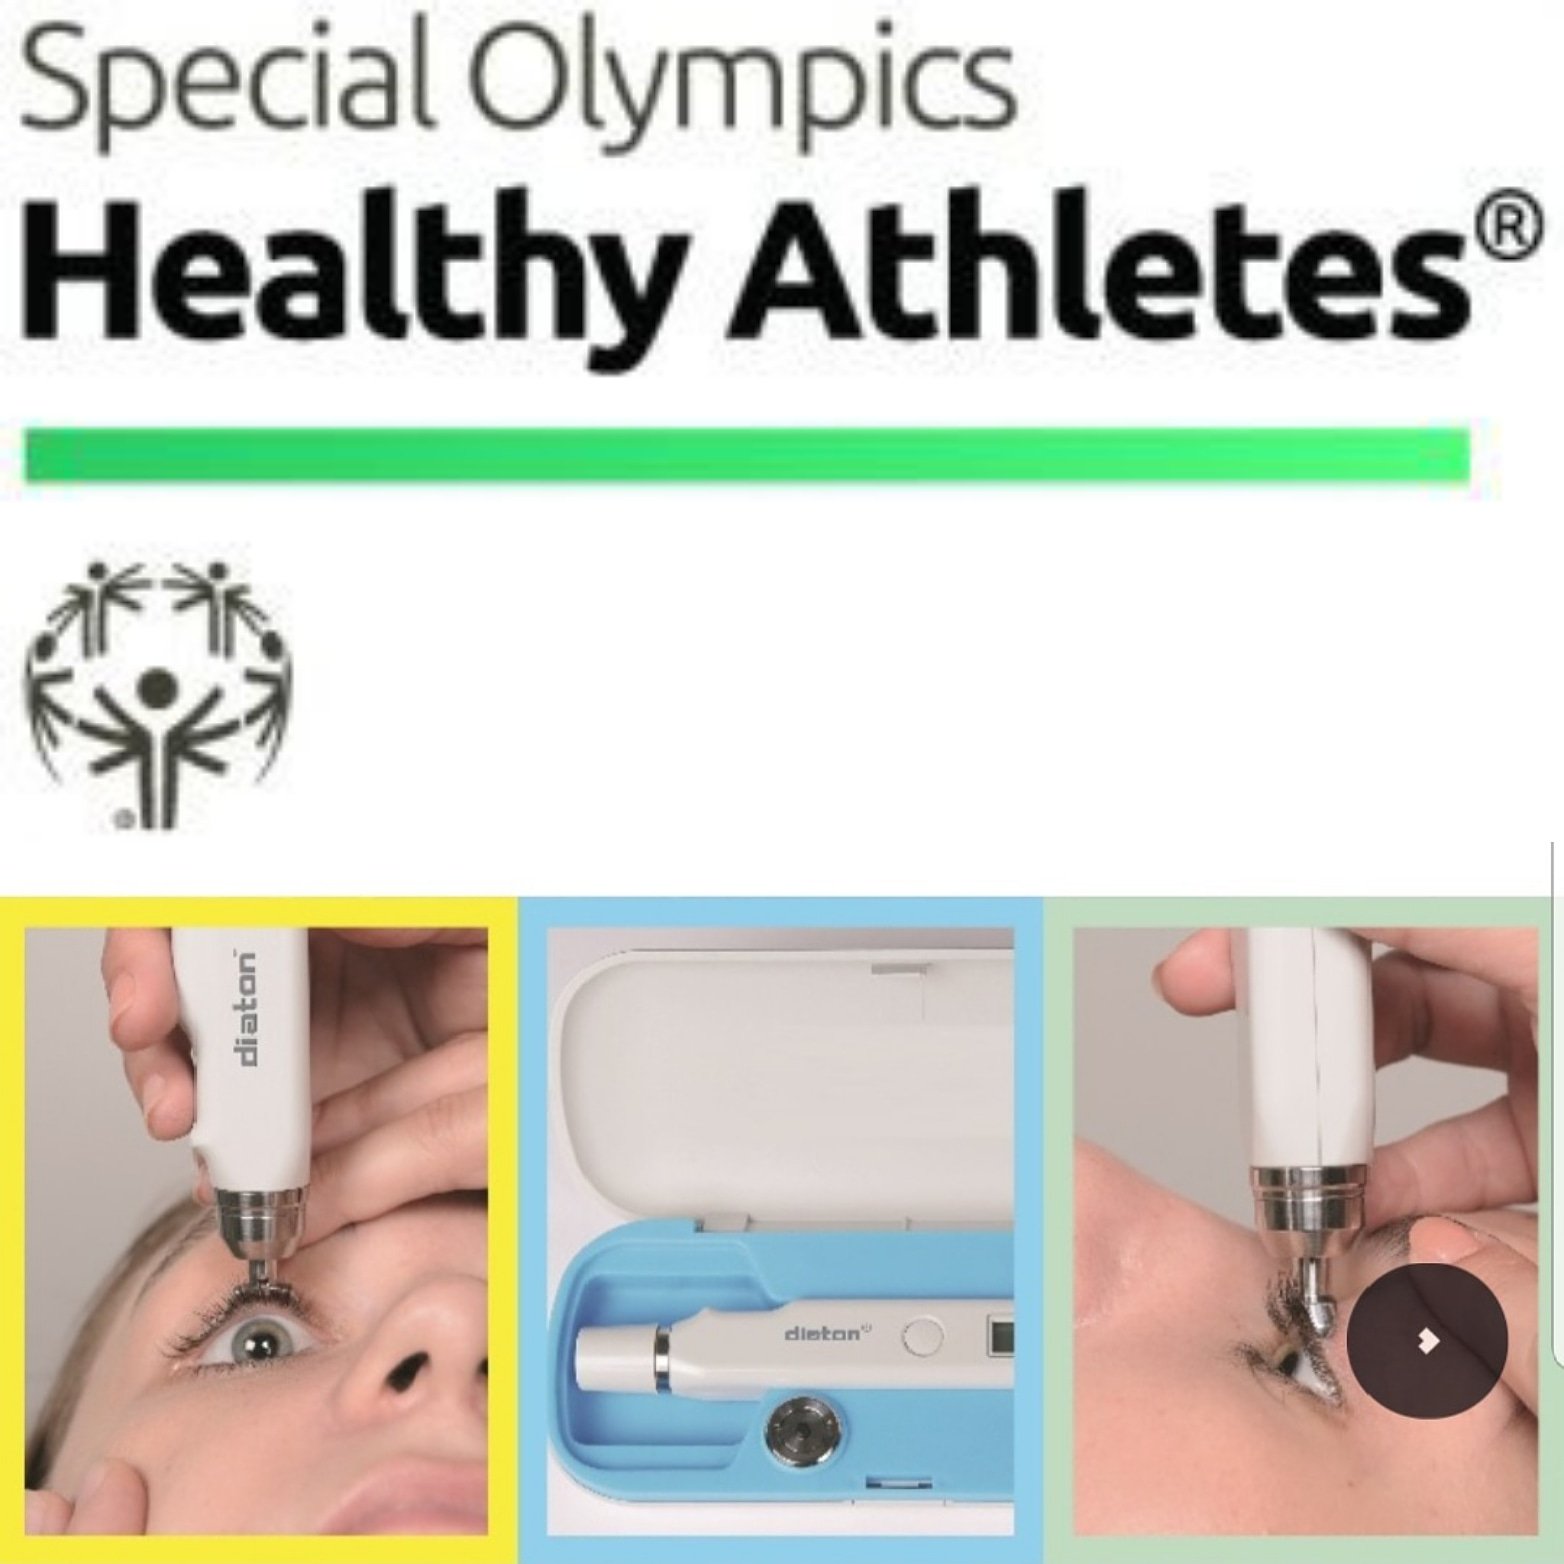 Team Diaton Tonometer is Proud to Volunteer at Special Olympics NYC Vision and Glaucoma Screening Event